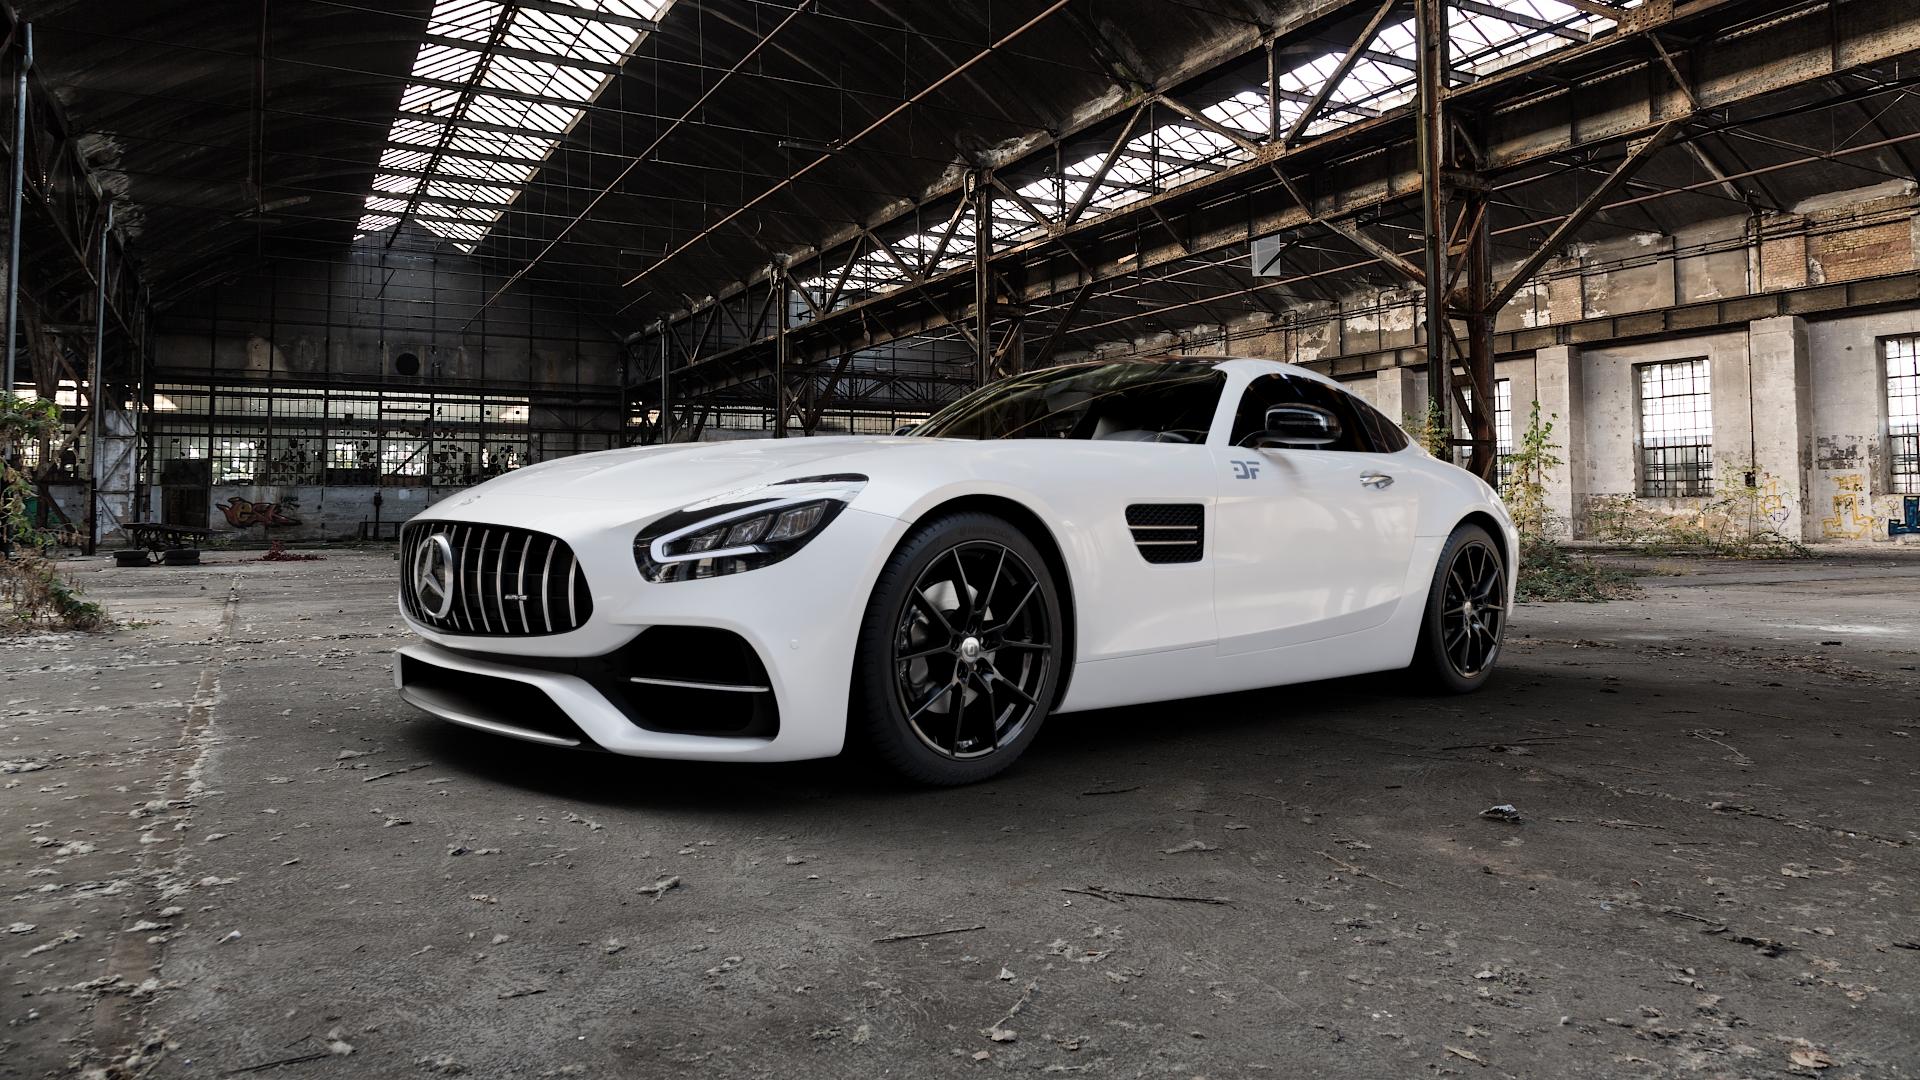 Mercedes AMG GT Type 197 4,0l GT S 375kW (510 hp) Wheels and Tyre Packages  | velonity.com